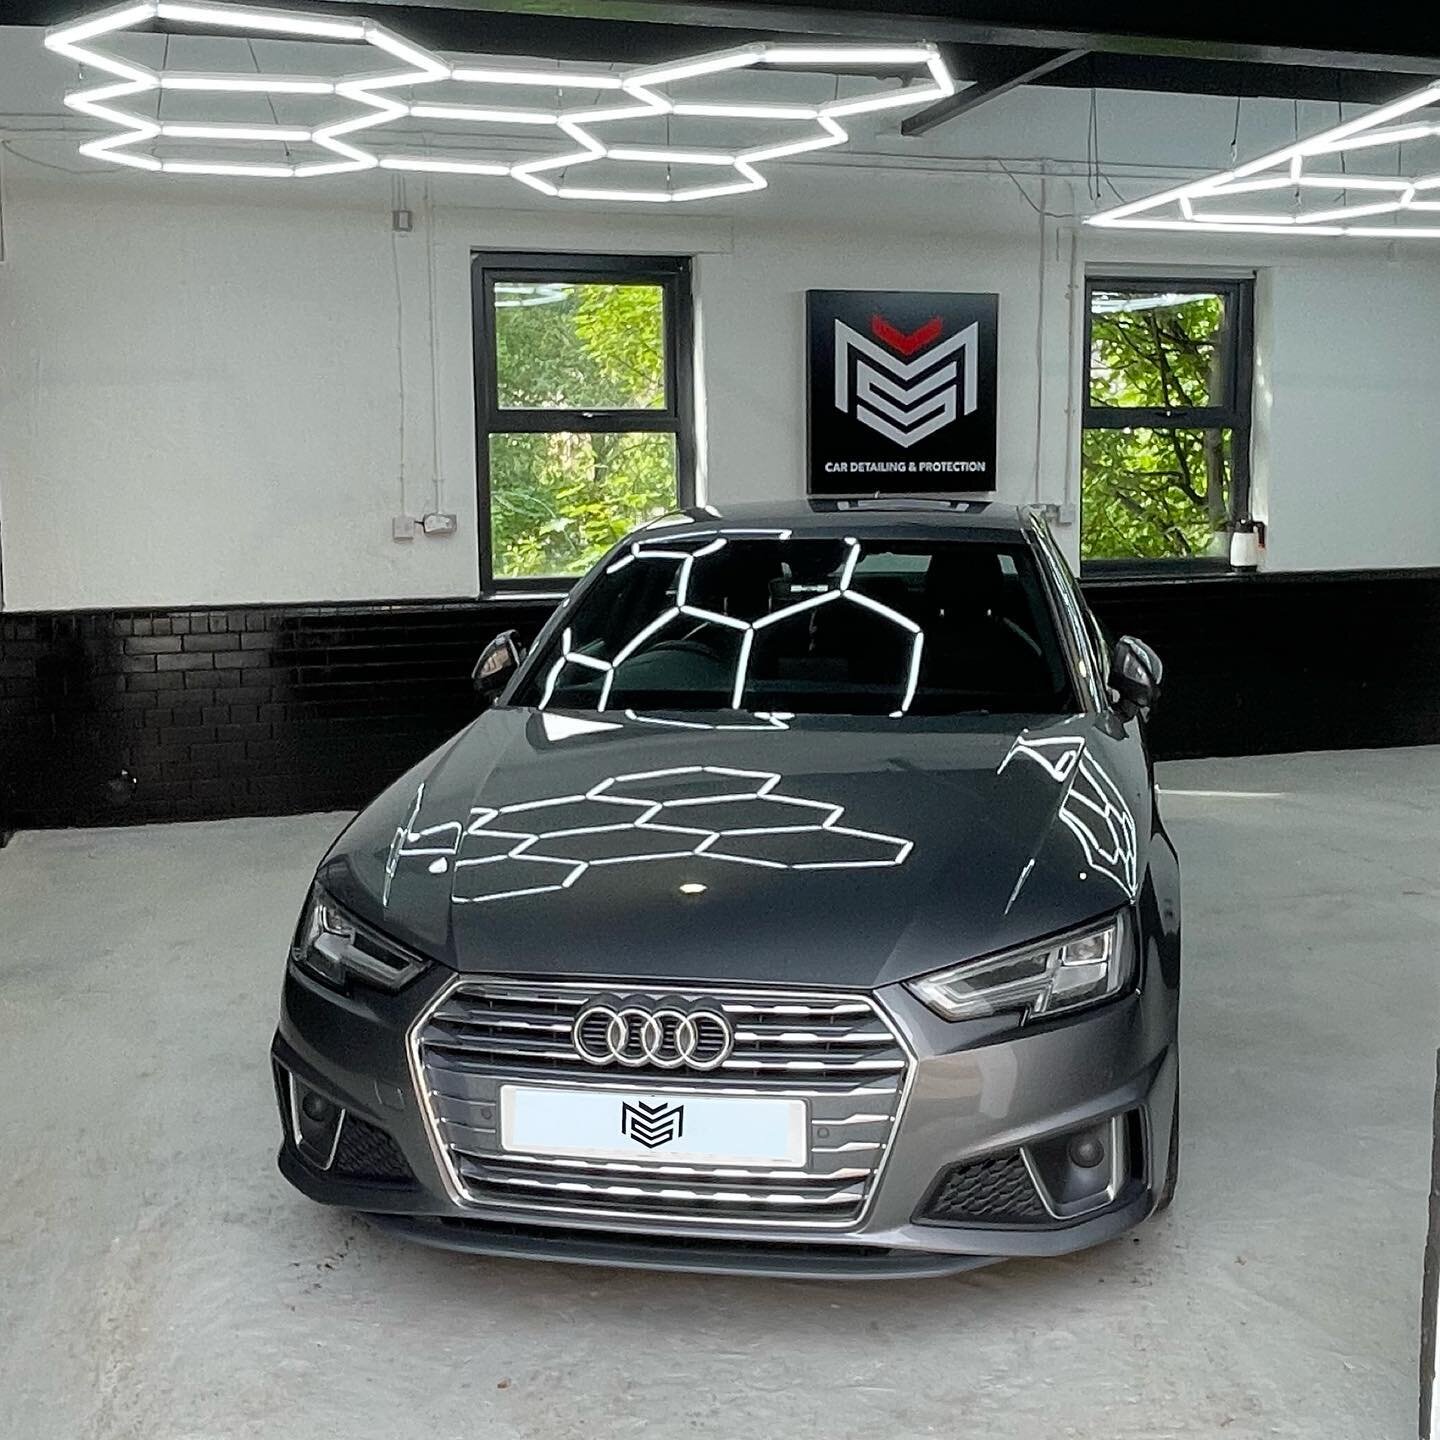 ✨MSDETAILINGUK✨
CAR DETAILING DONE RIGHT✅&ndash; you&rsquo;ll never look at another detailer again

Message now to get your car detailed by us!!! 
___________
➡️SWIPE➡️
__________________
Facebook- msdetailinguk
Snapchat- msdetailinguk 
_____________